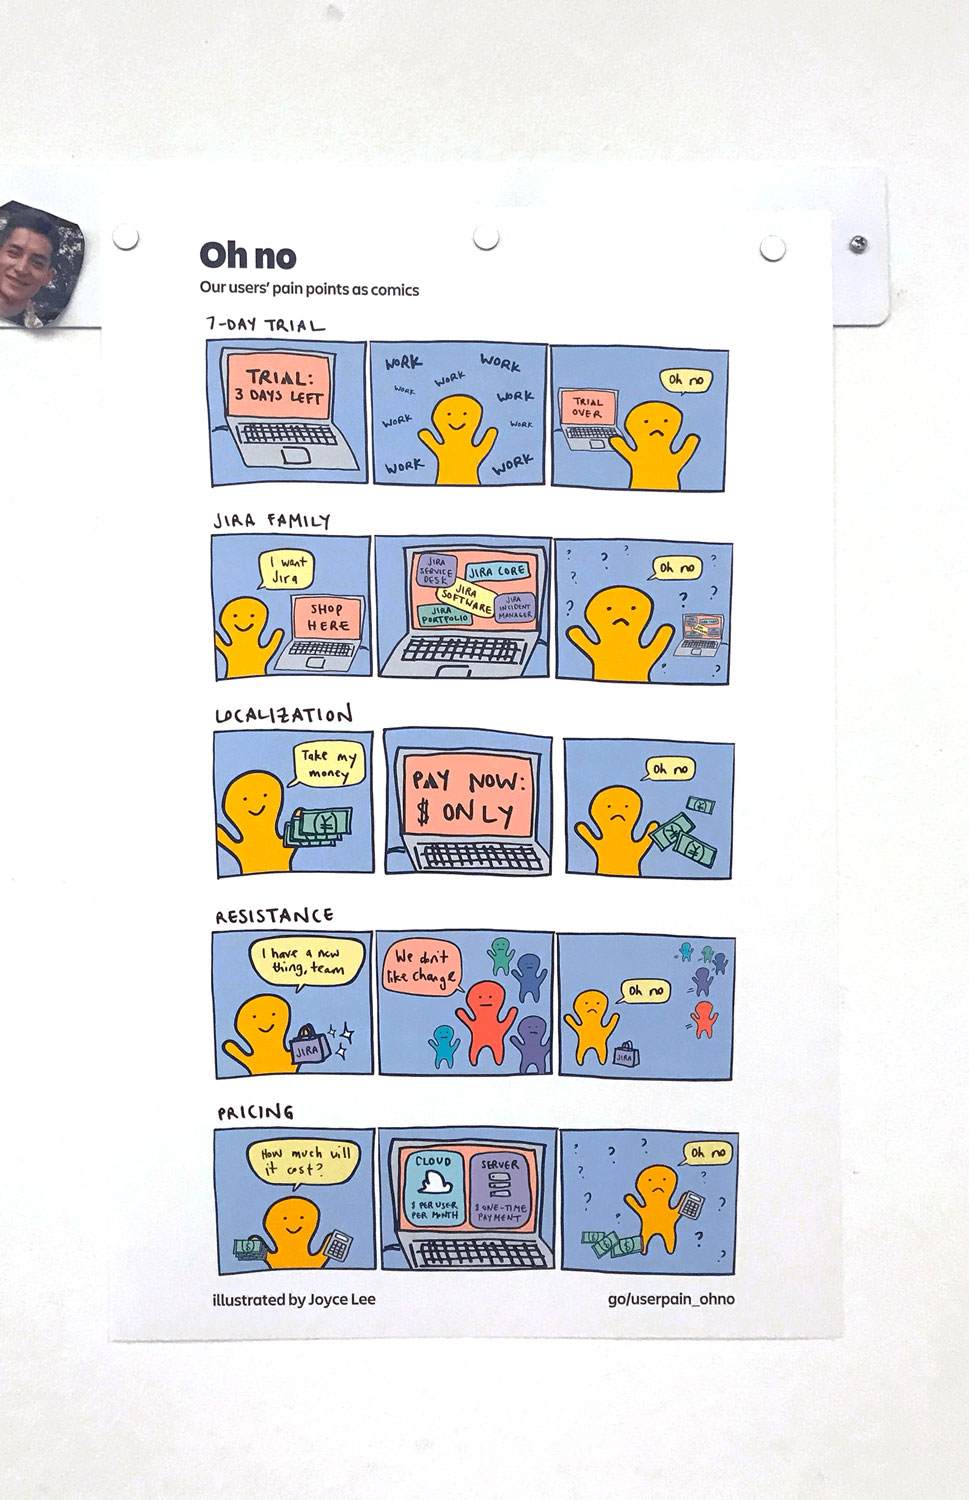 A poster of 5 comics labeled Oh no: our users' pain points as comics